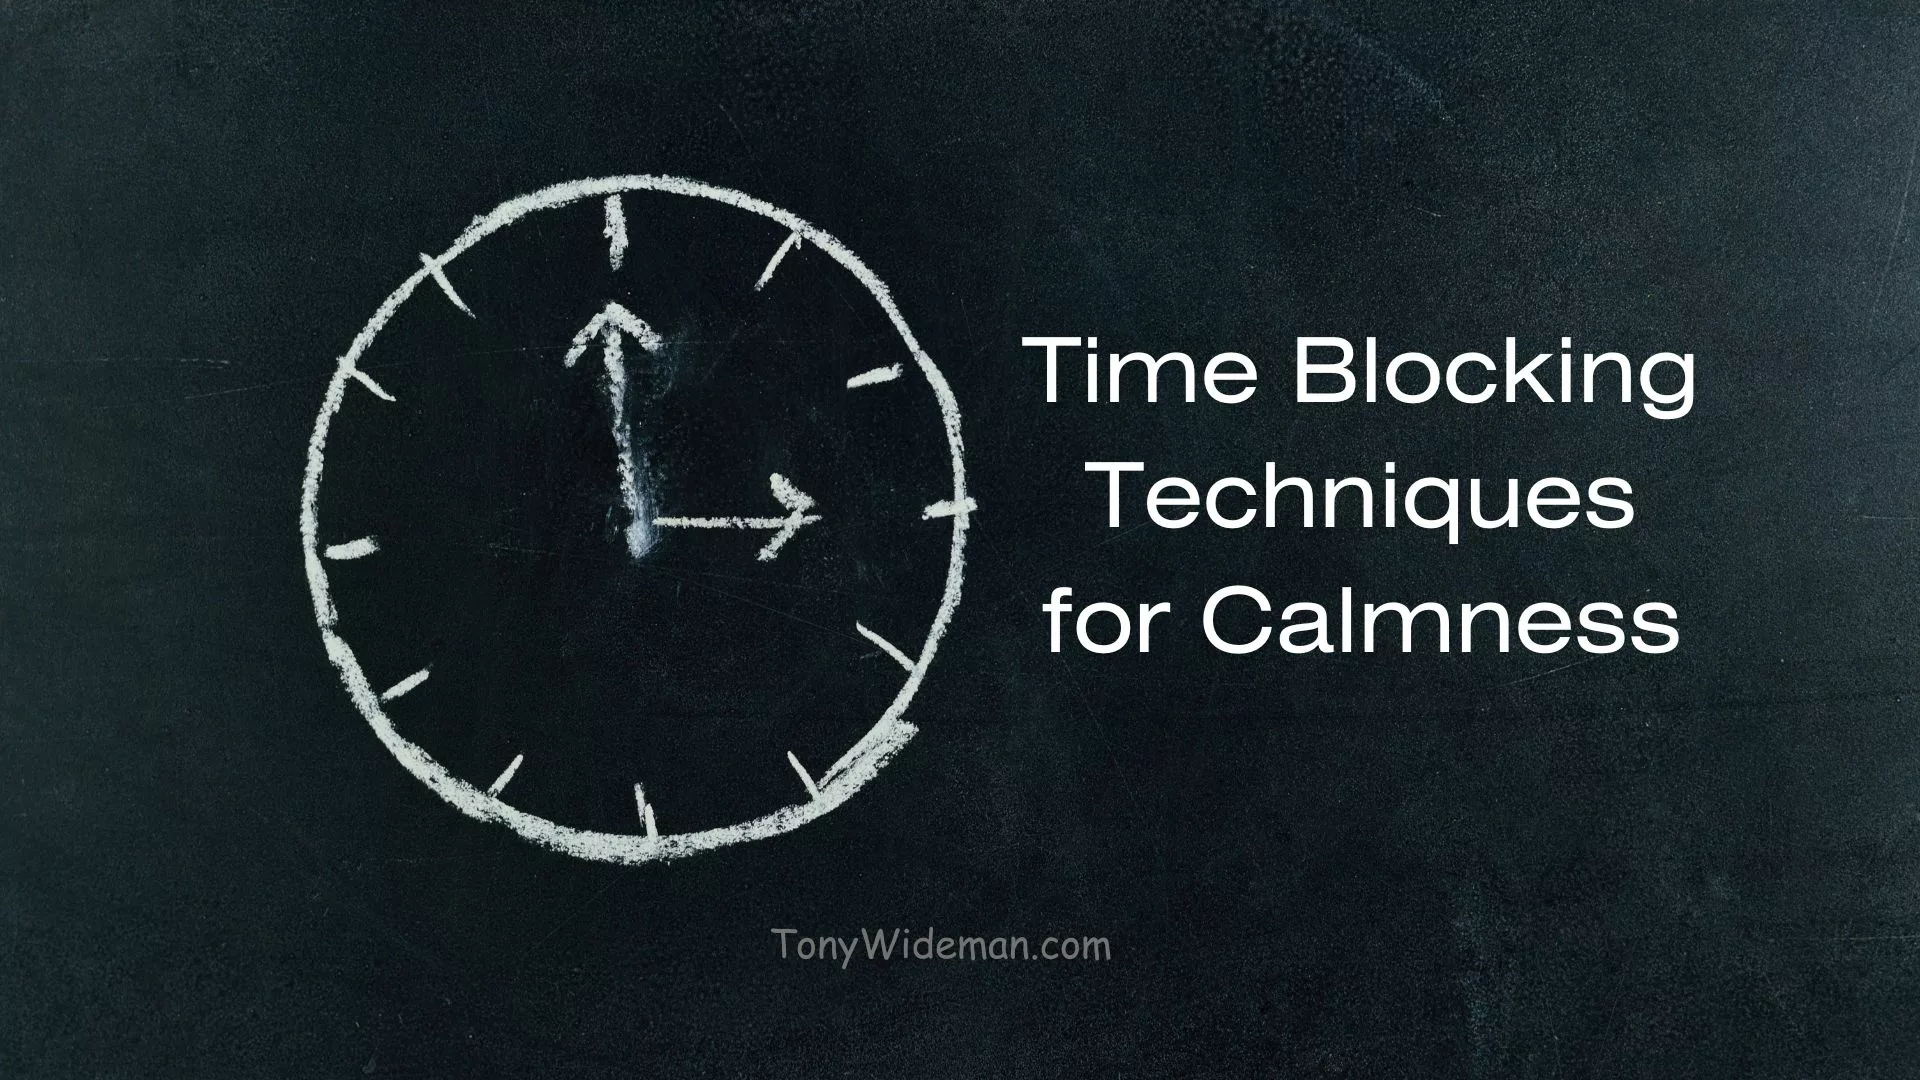 Time Blocking Techniques for Calmness